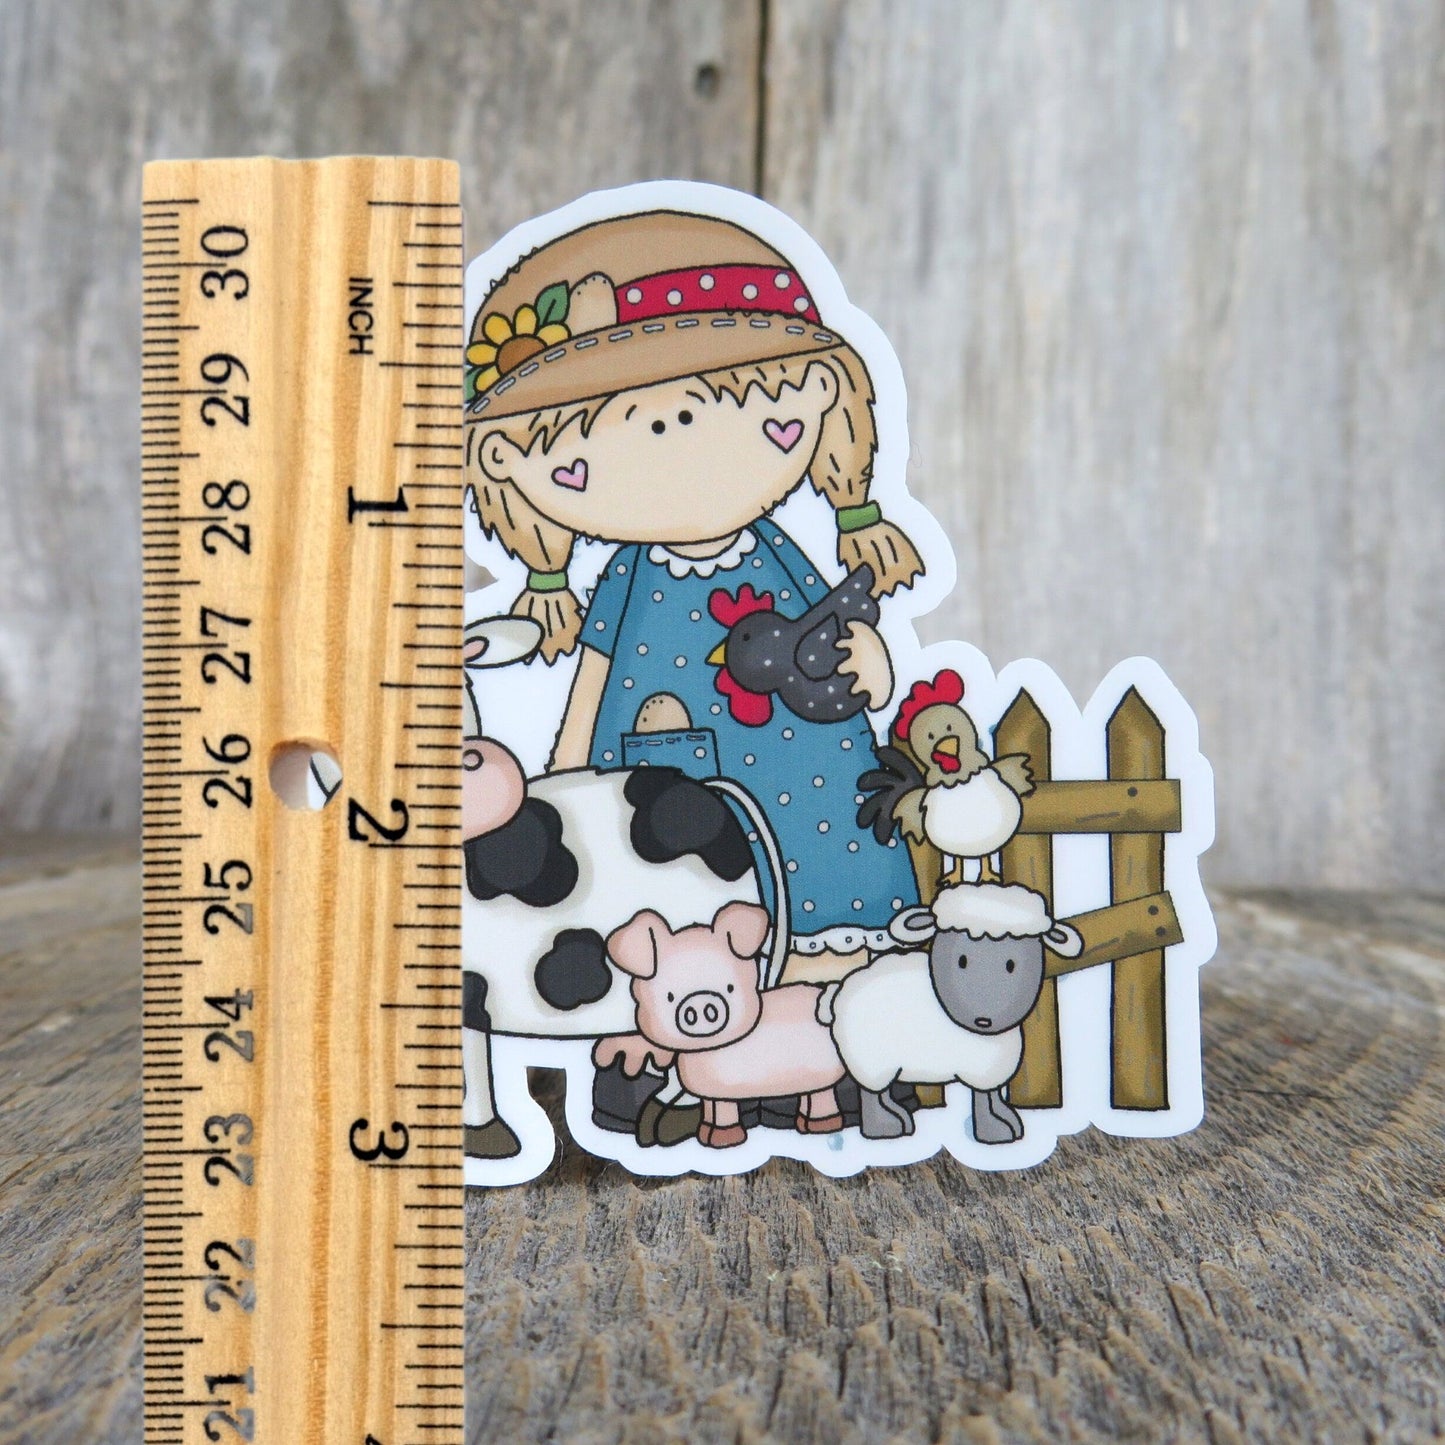 Farmer Girl Sticker Waterproof Urban Farming Country Style Chicken Cows Full Color Blonde Pig